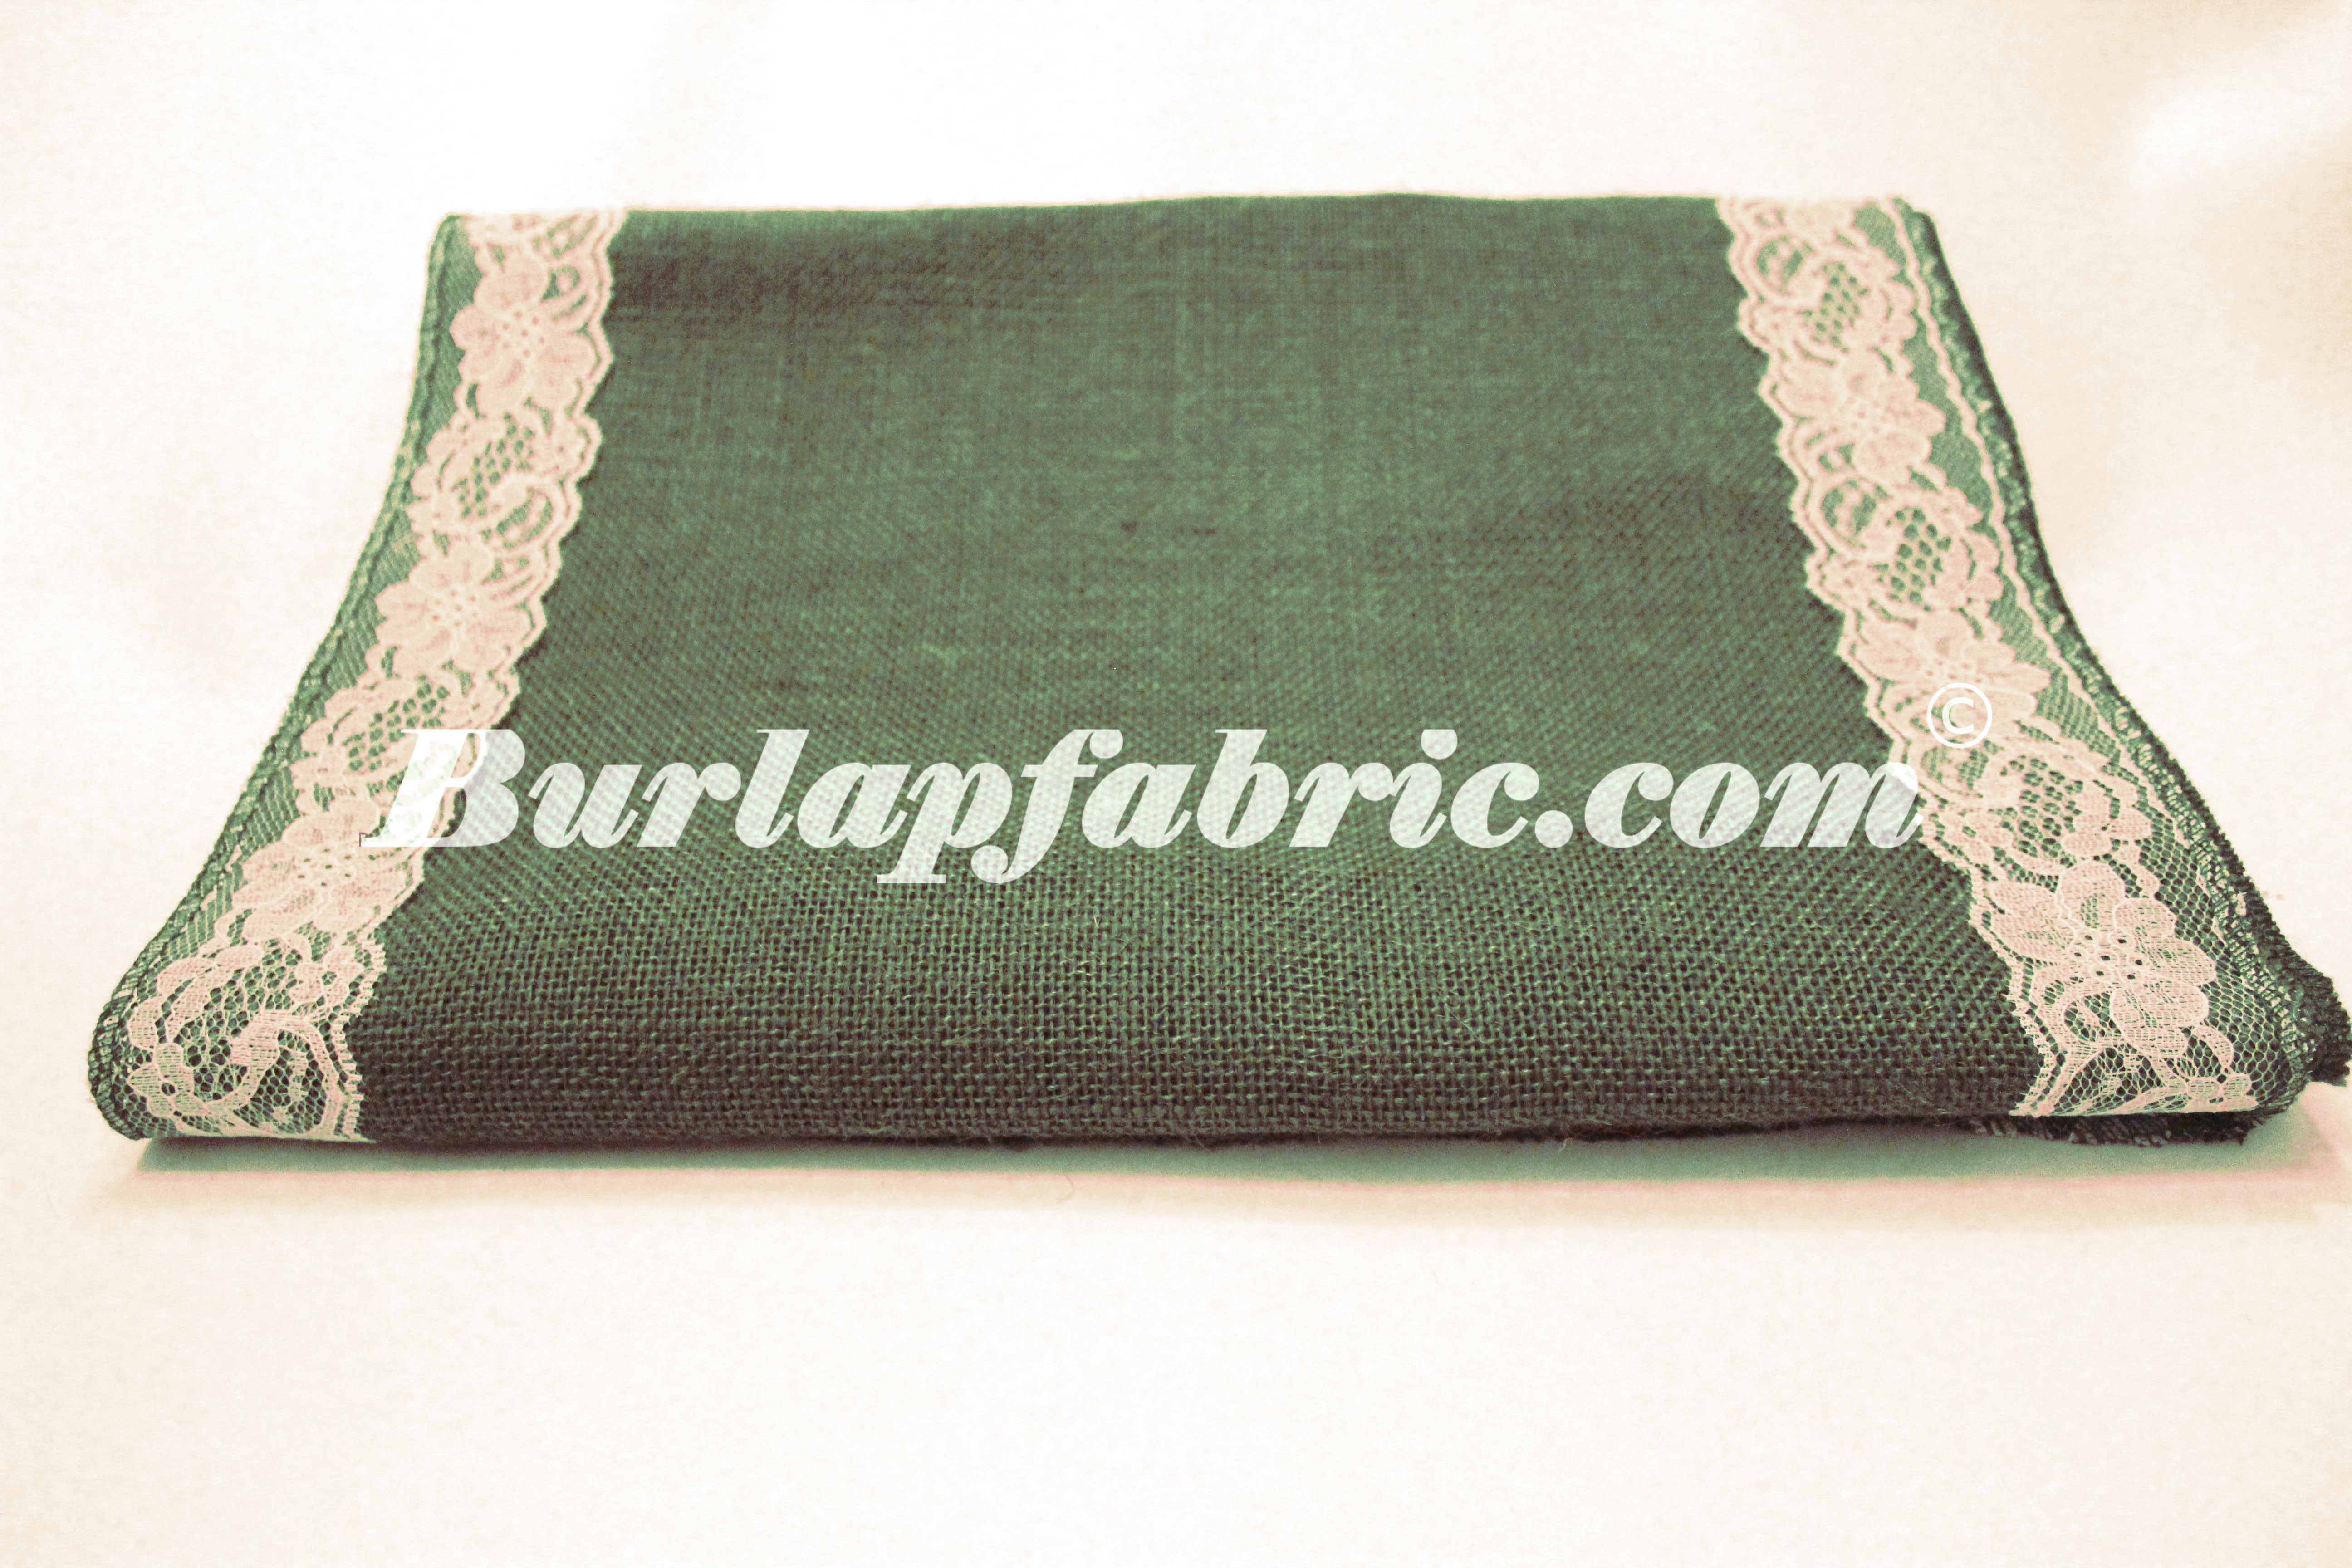 14" Hunter Green Burlap Runner with 2" White Lace Borders - Click Image to Close